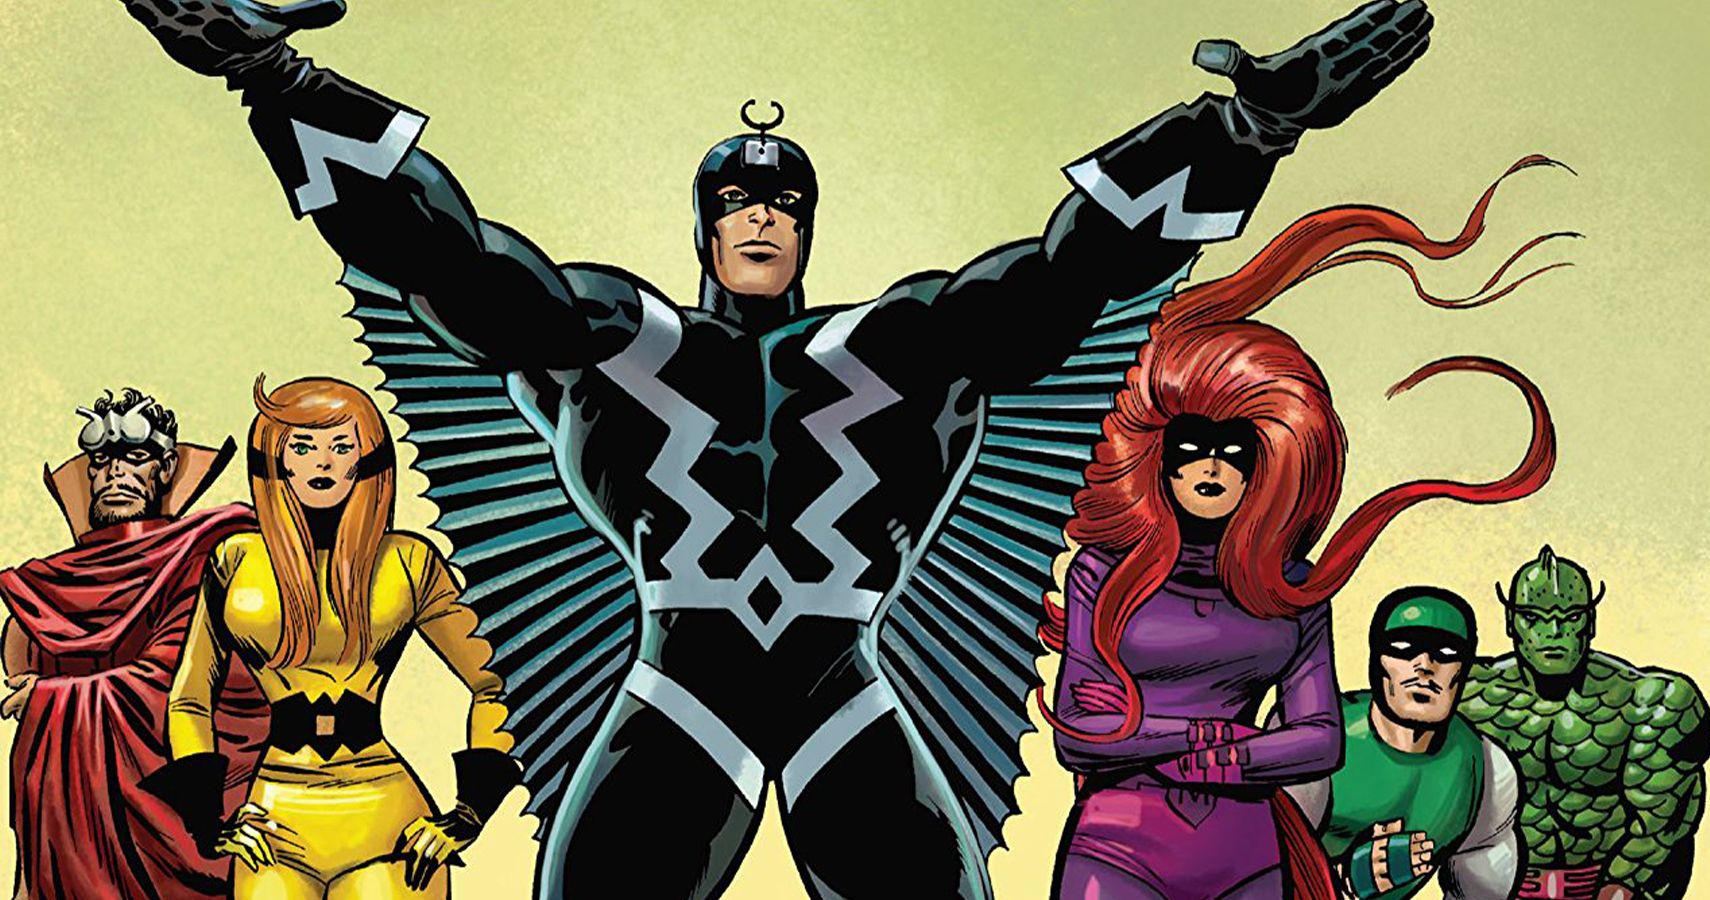 9. The Inhumans vs. Kang: The Inhumans are not a very heroic group, but they have fought their share of heroes. Kang kidnapped Ahura Boltagan (son of Medusa and Black Bolt) and raised him in the time-stream. In the end, Ahura defeats Kang and kills him.